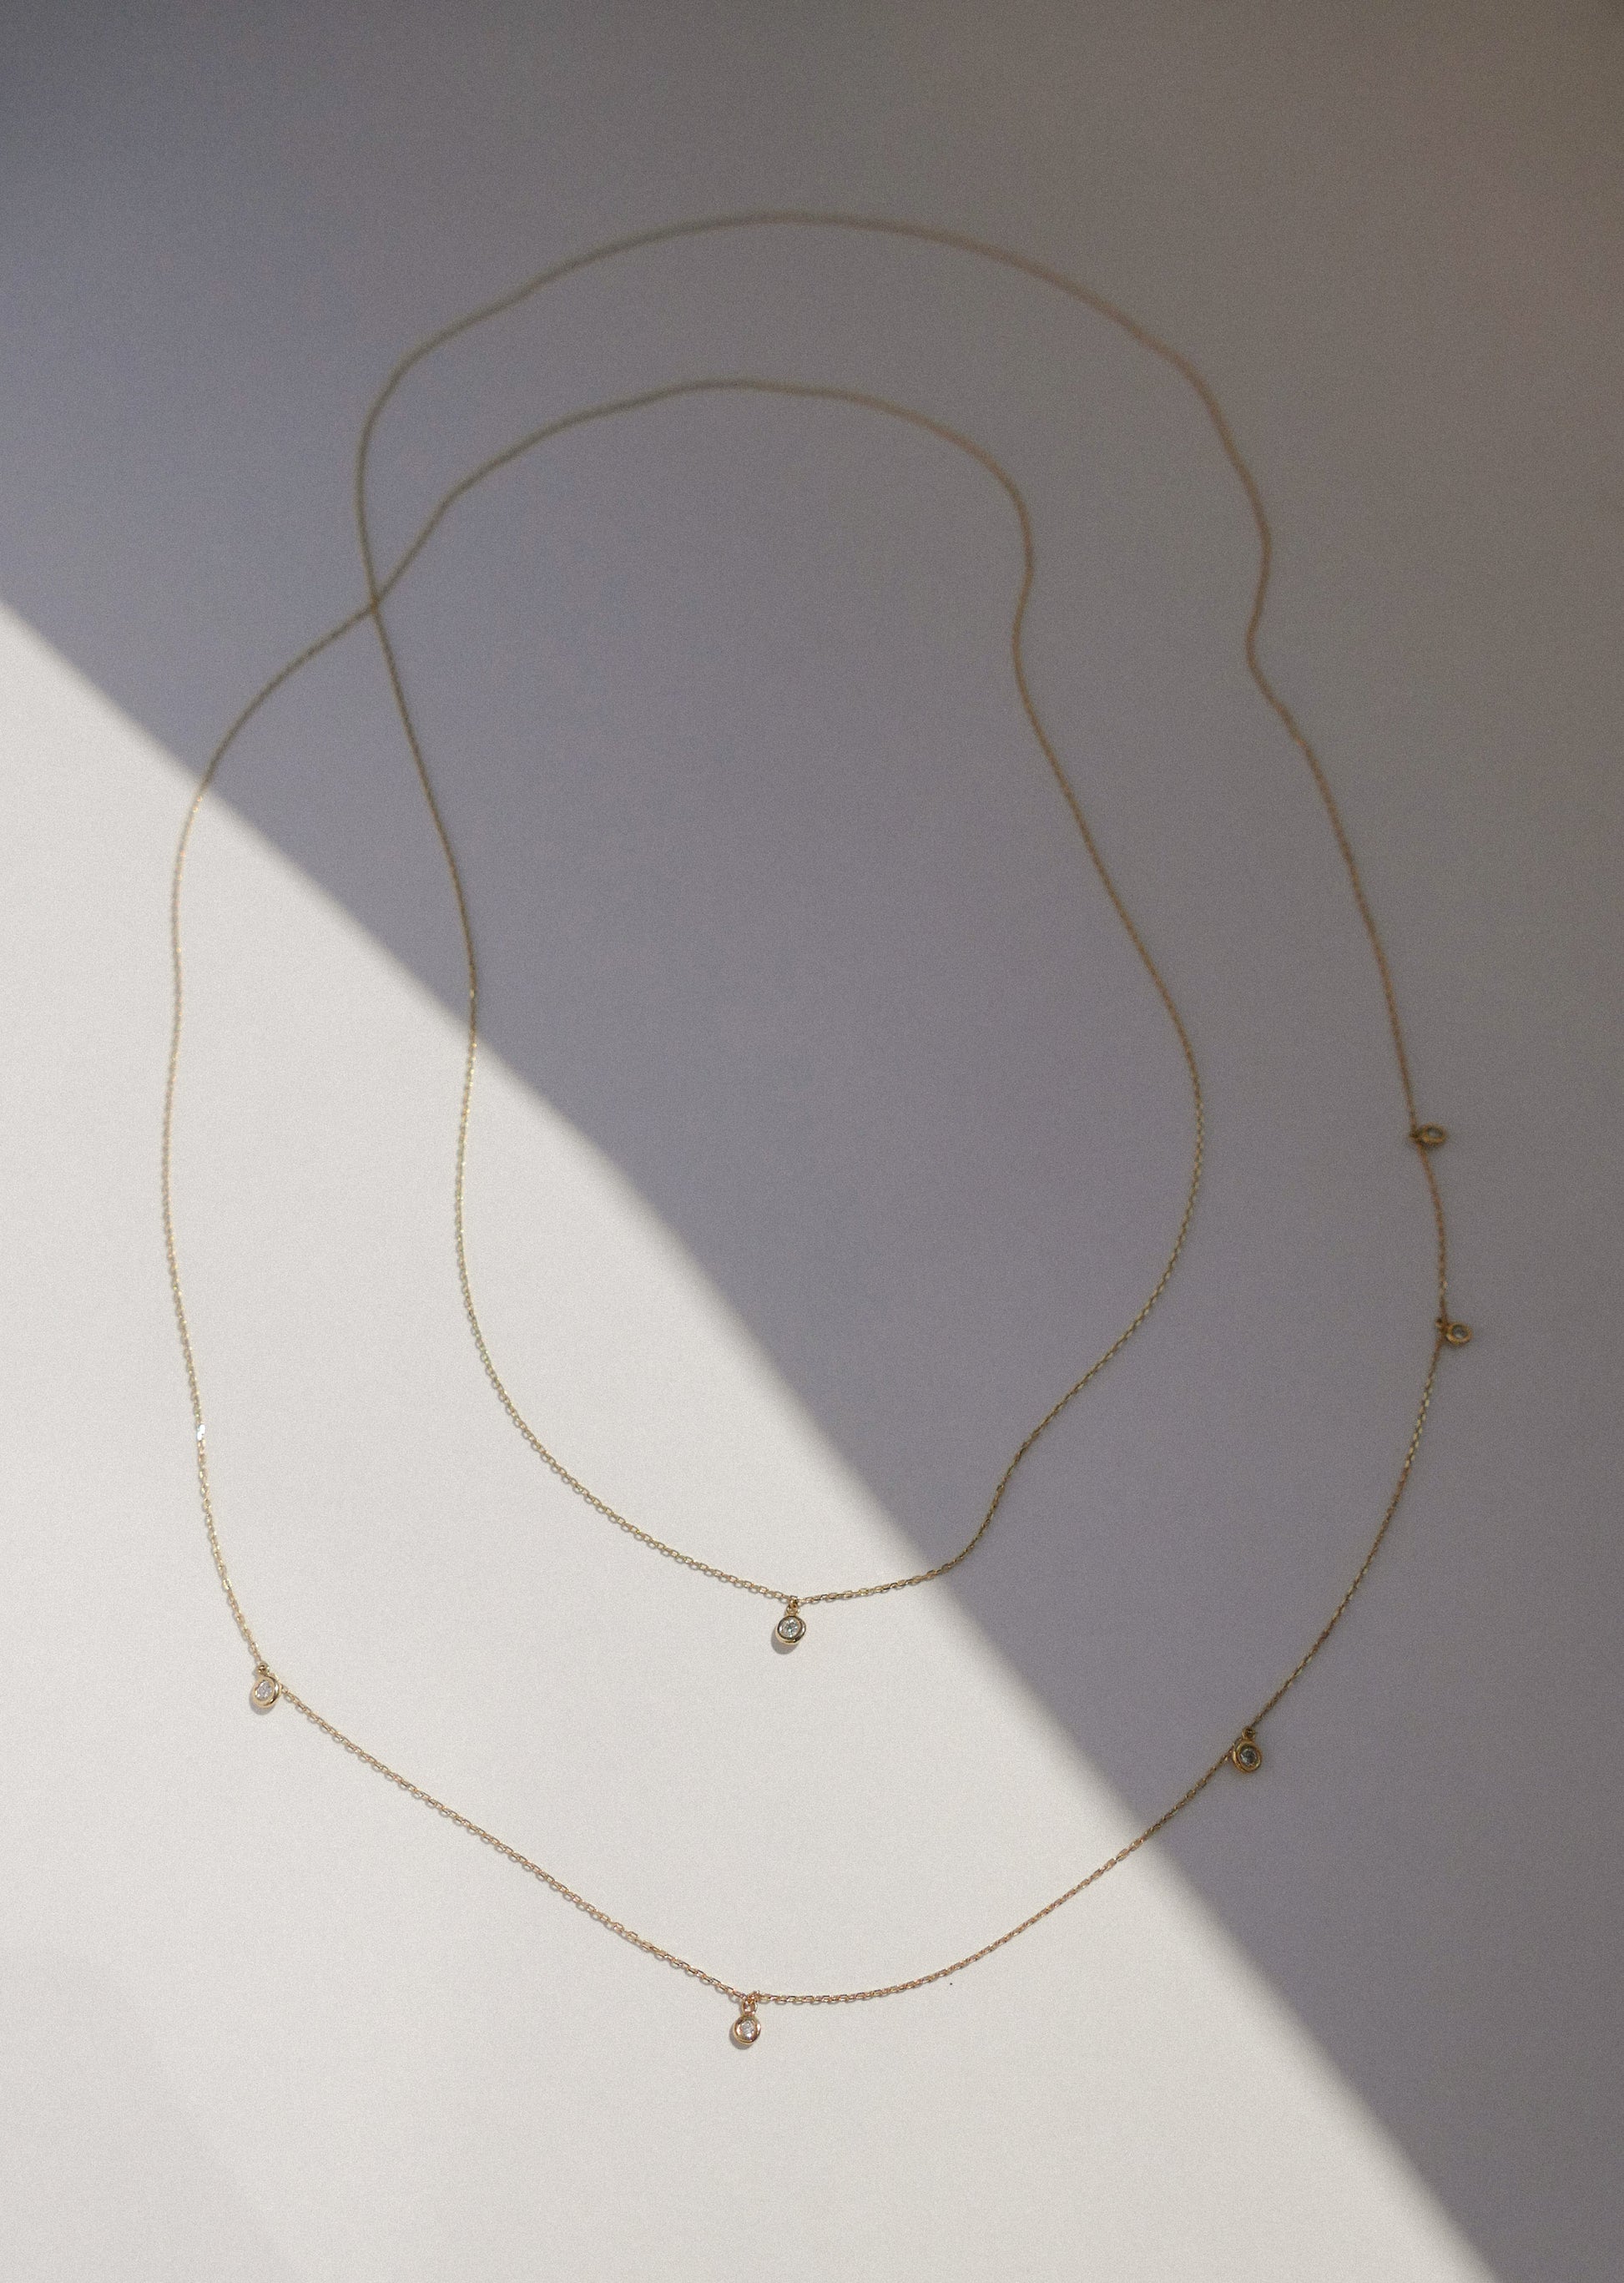 The Endless Necklace - Adriana Chede Jewellery